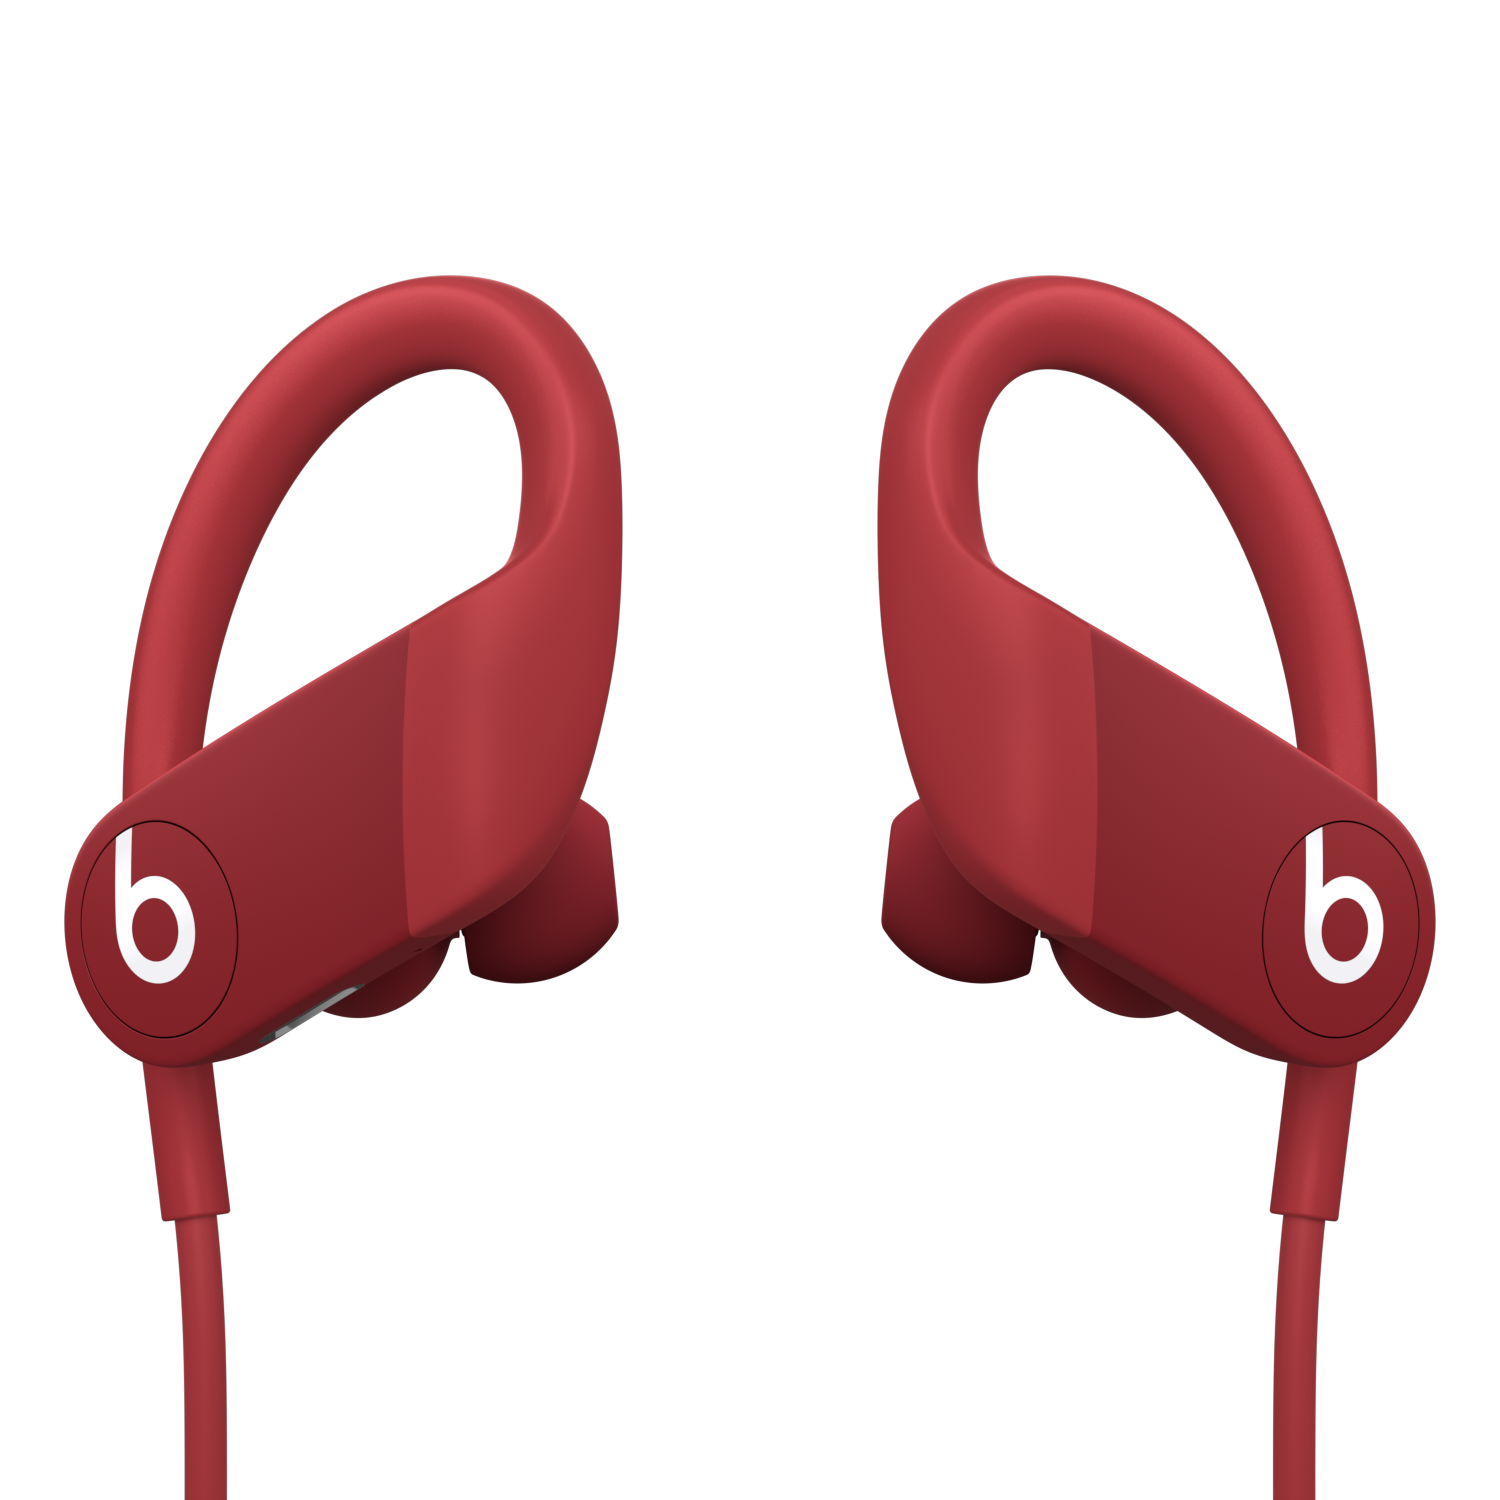 Powerbeats High-Performance Wireless Earphones with Apple H1 Headphone Chip - Red - image 3 of 11